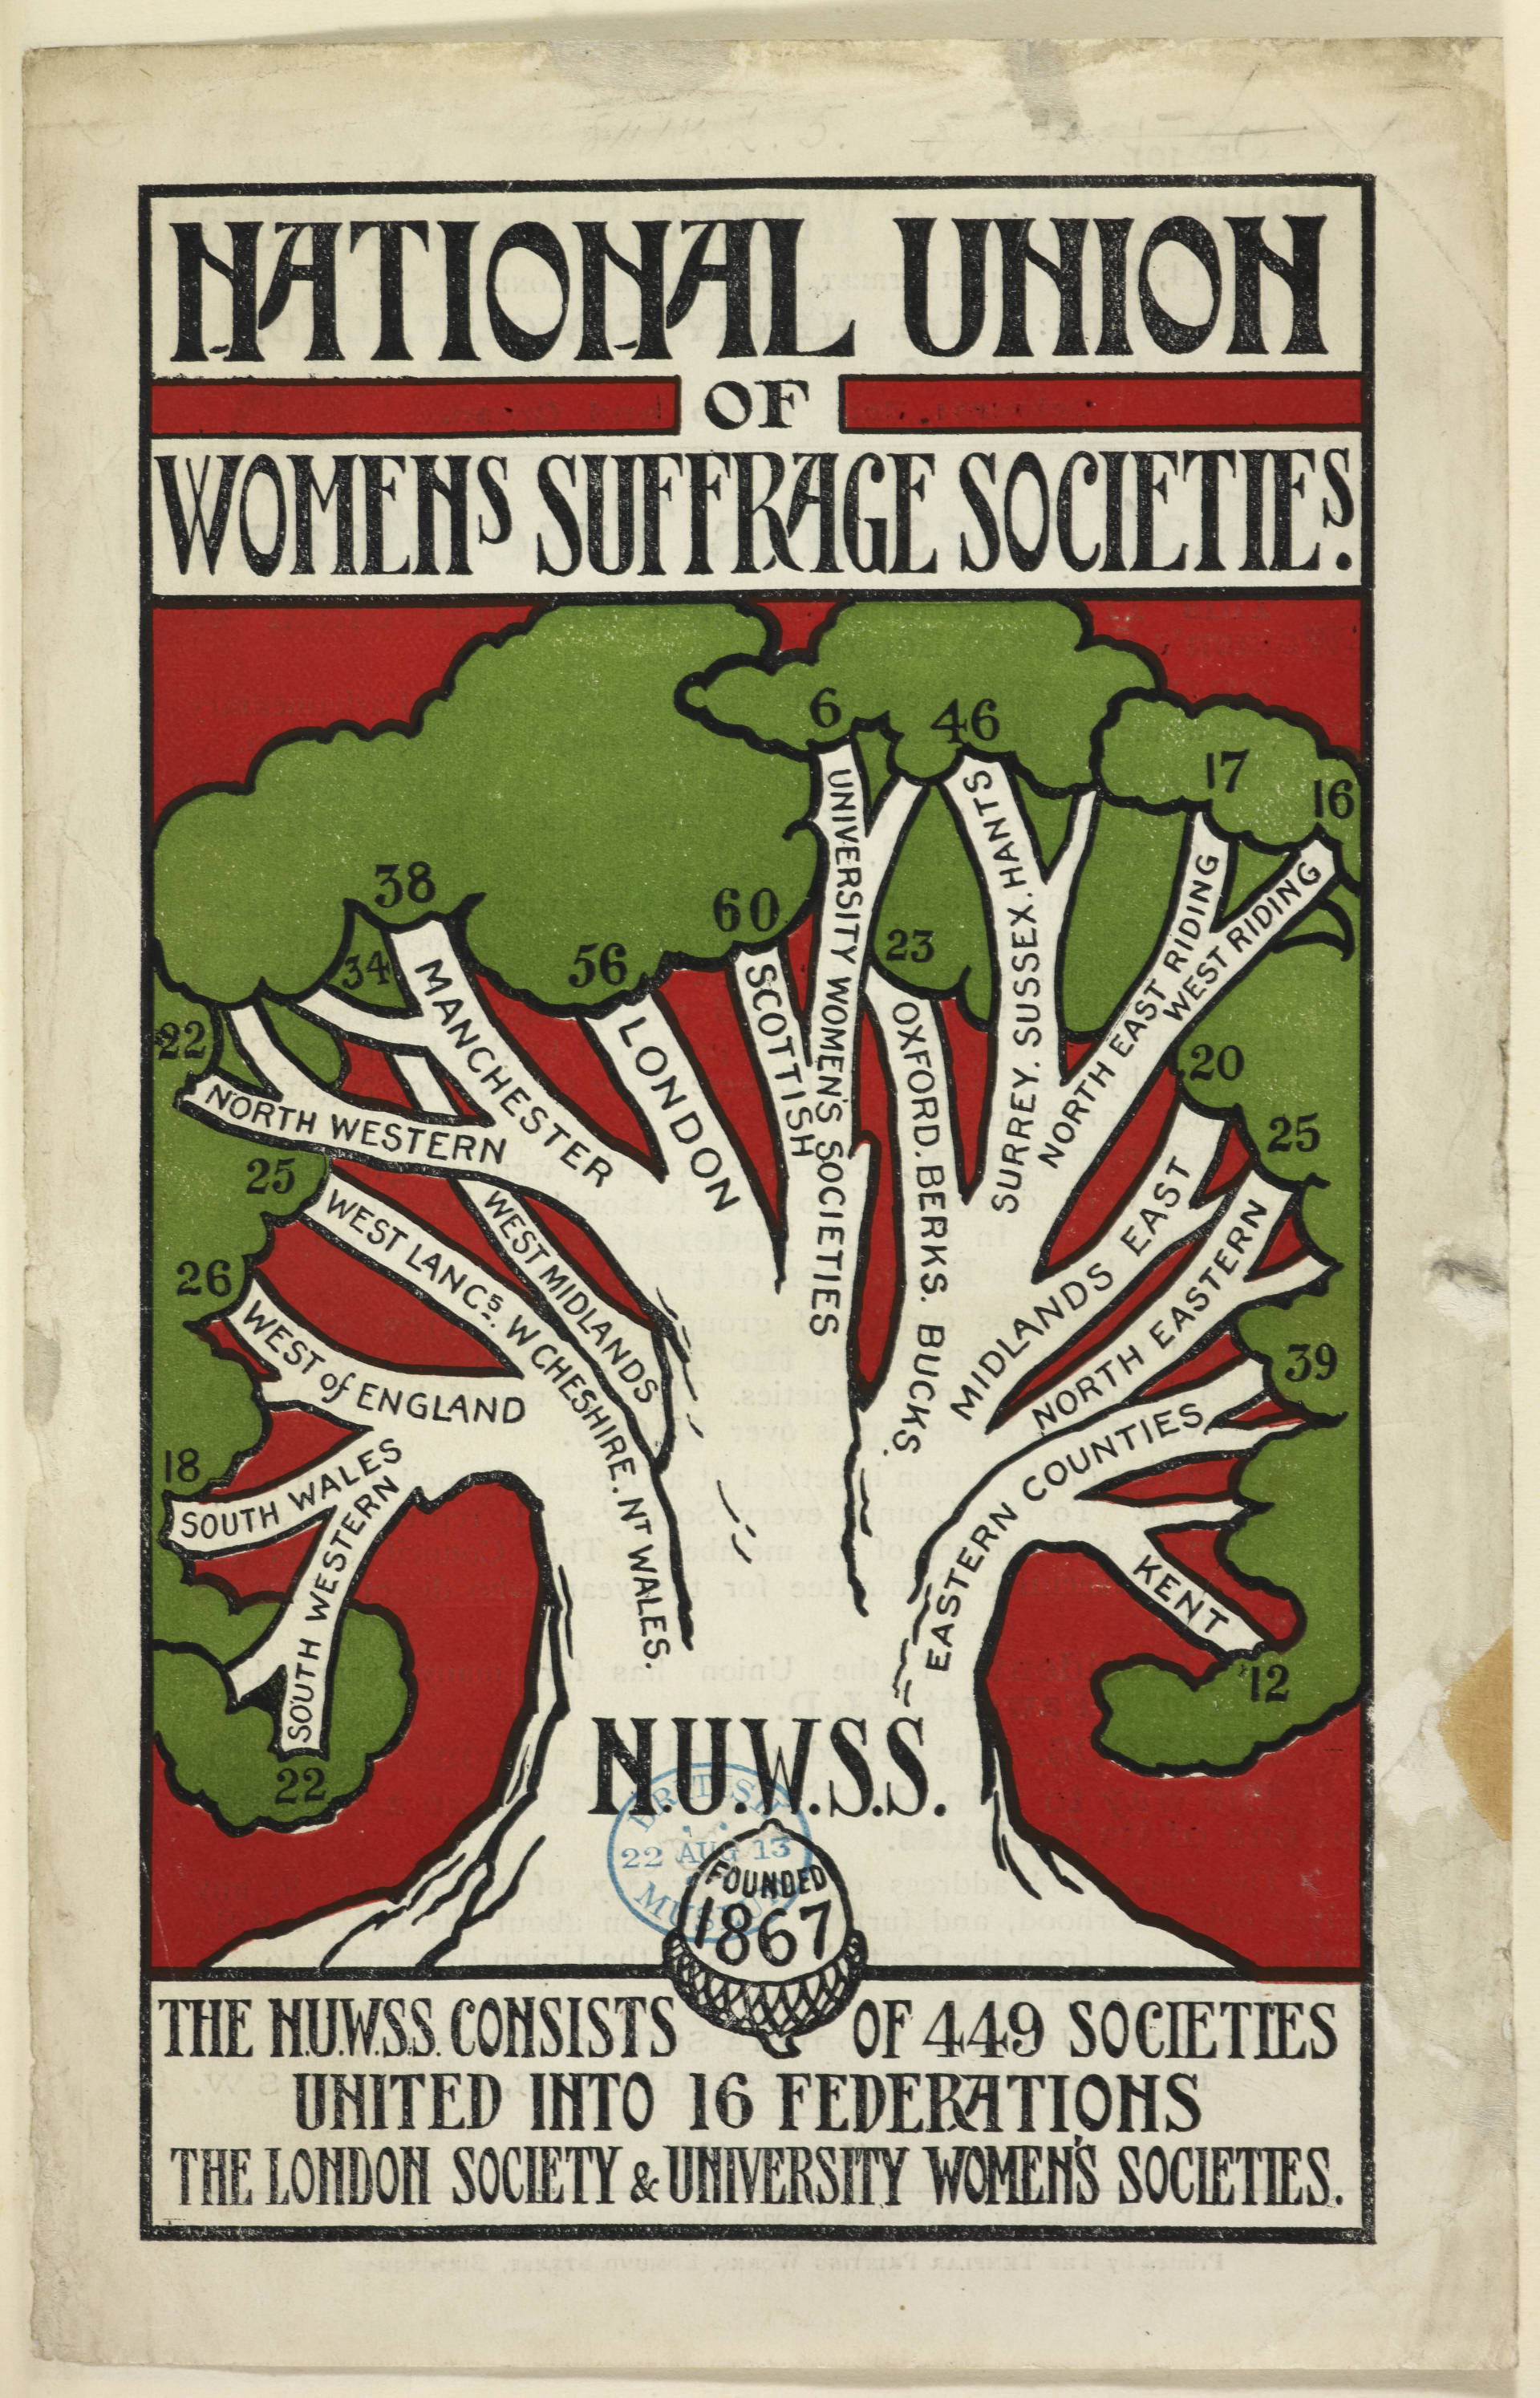 Image of the front cover of a National Union of Women’s Suffrage Societies leaflet featuring an illustrated tree with several branches. Each branch has a place name – ‘Manchester’, ‘London’ etc. – referencing the different branches of the society.